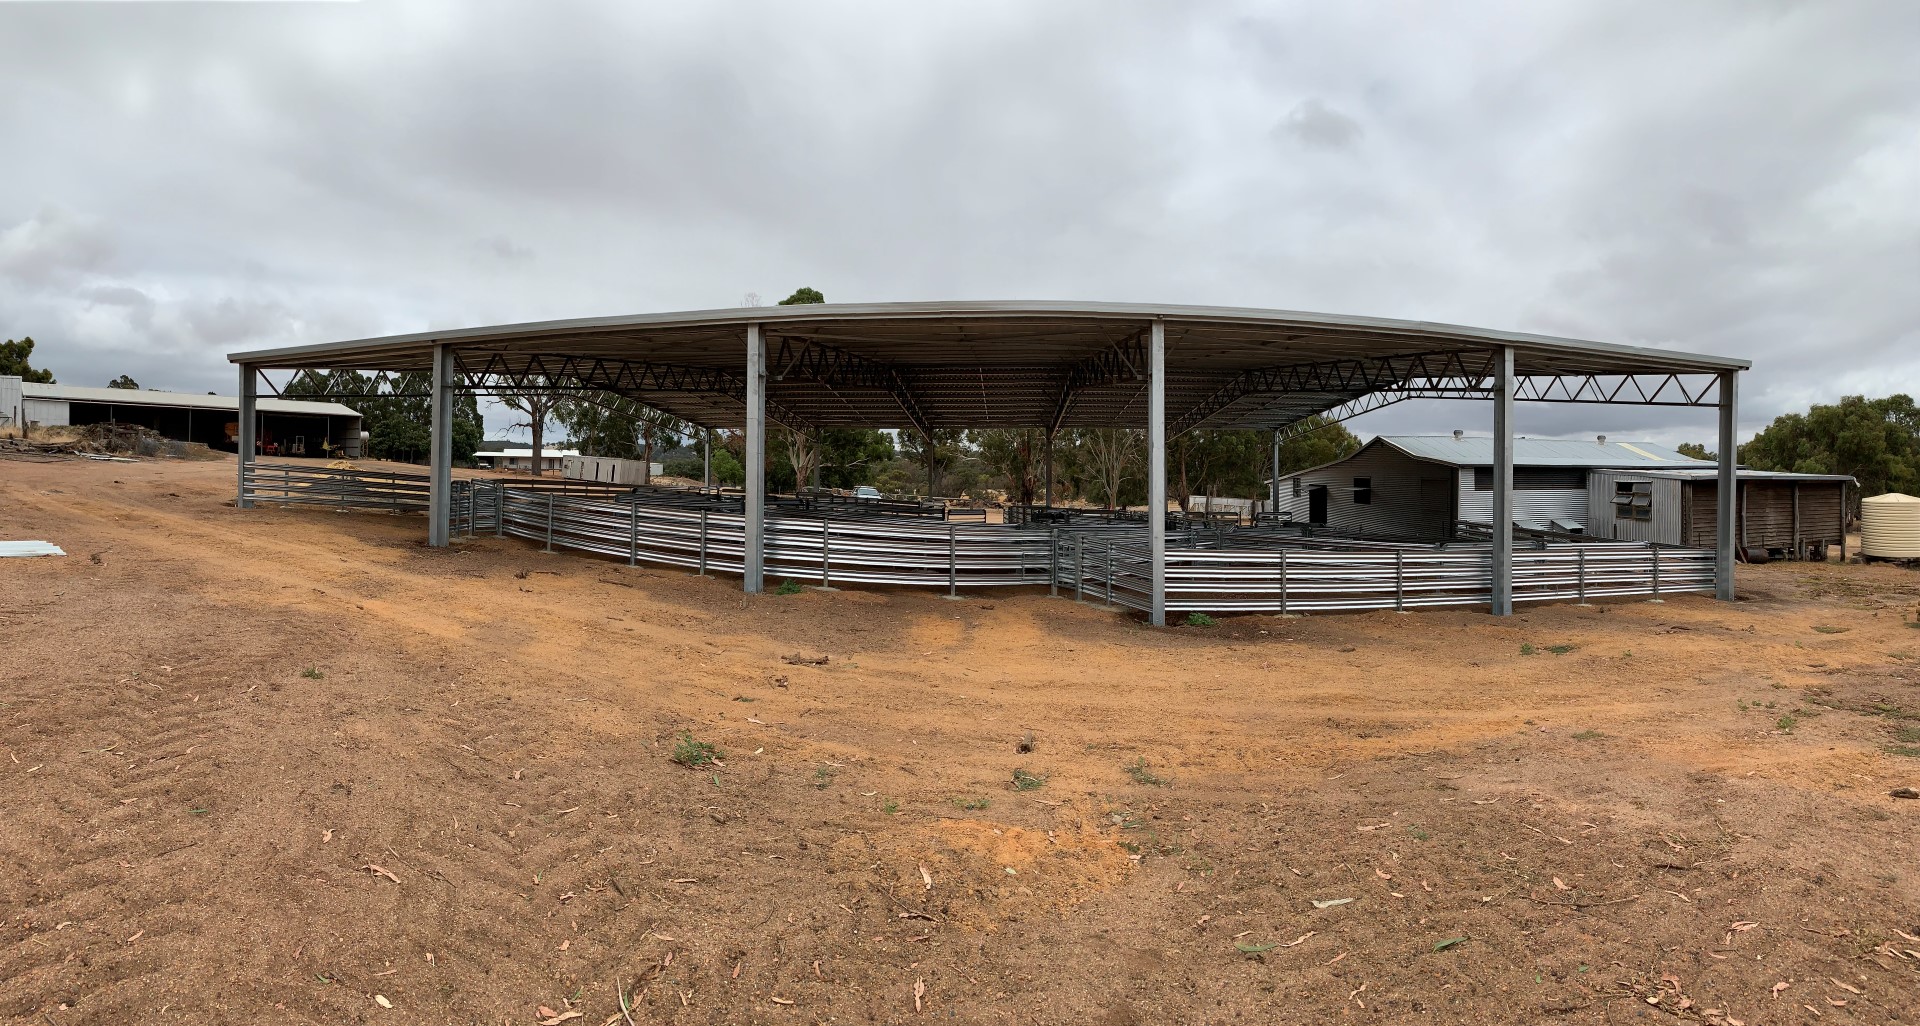 A custom livestock shed we designed and installed on a farm in remote Western Australia property to keep sheep away from the rain.